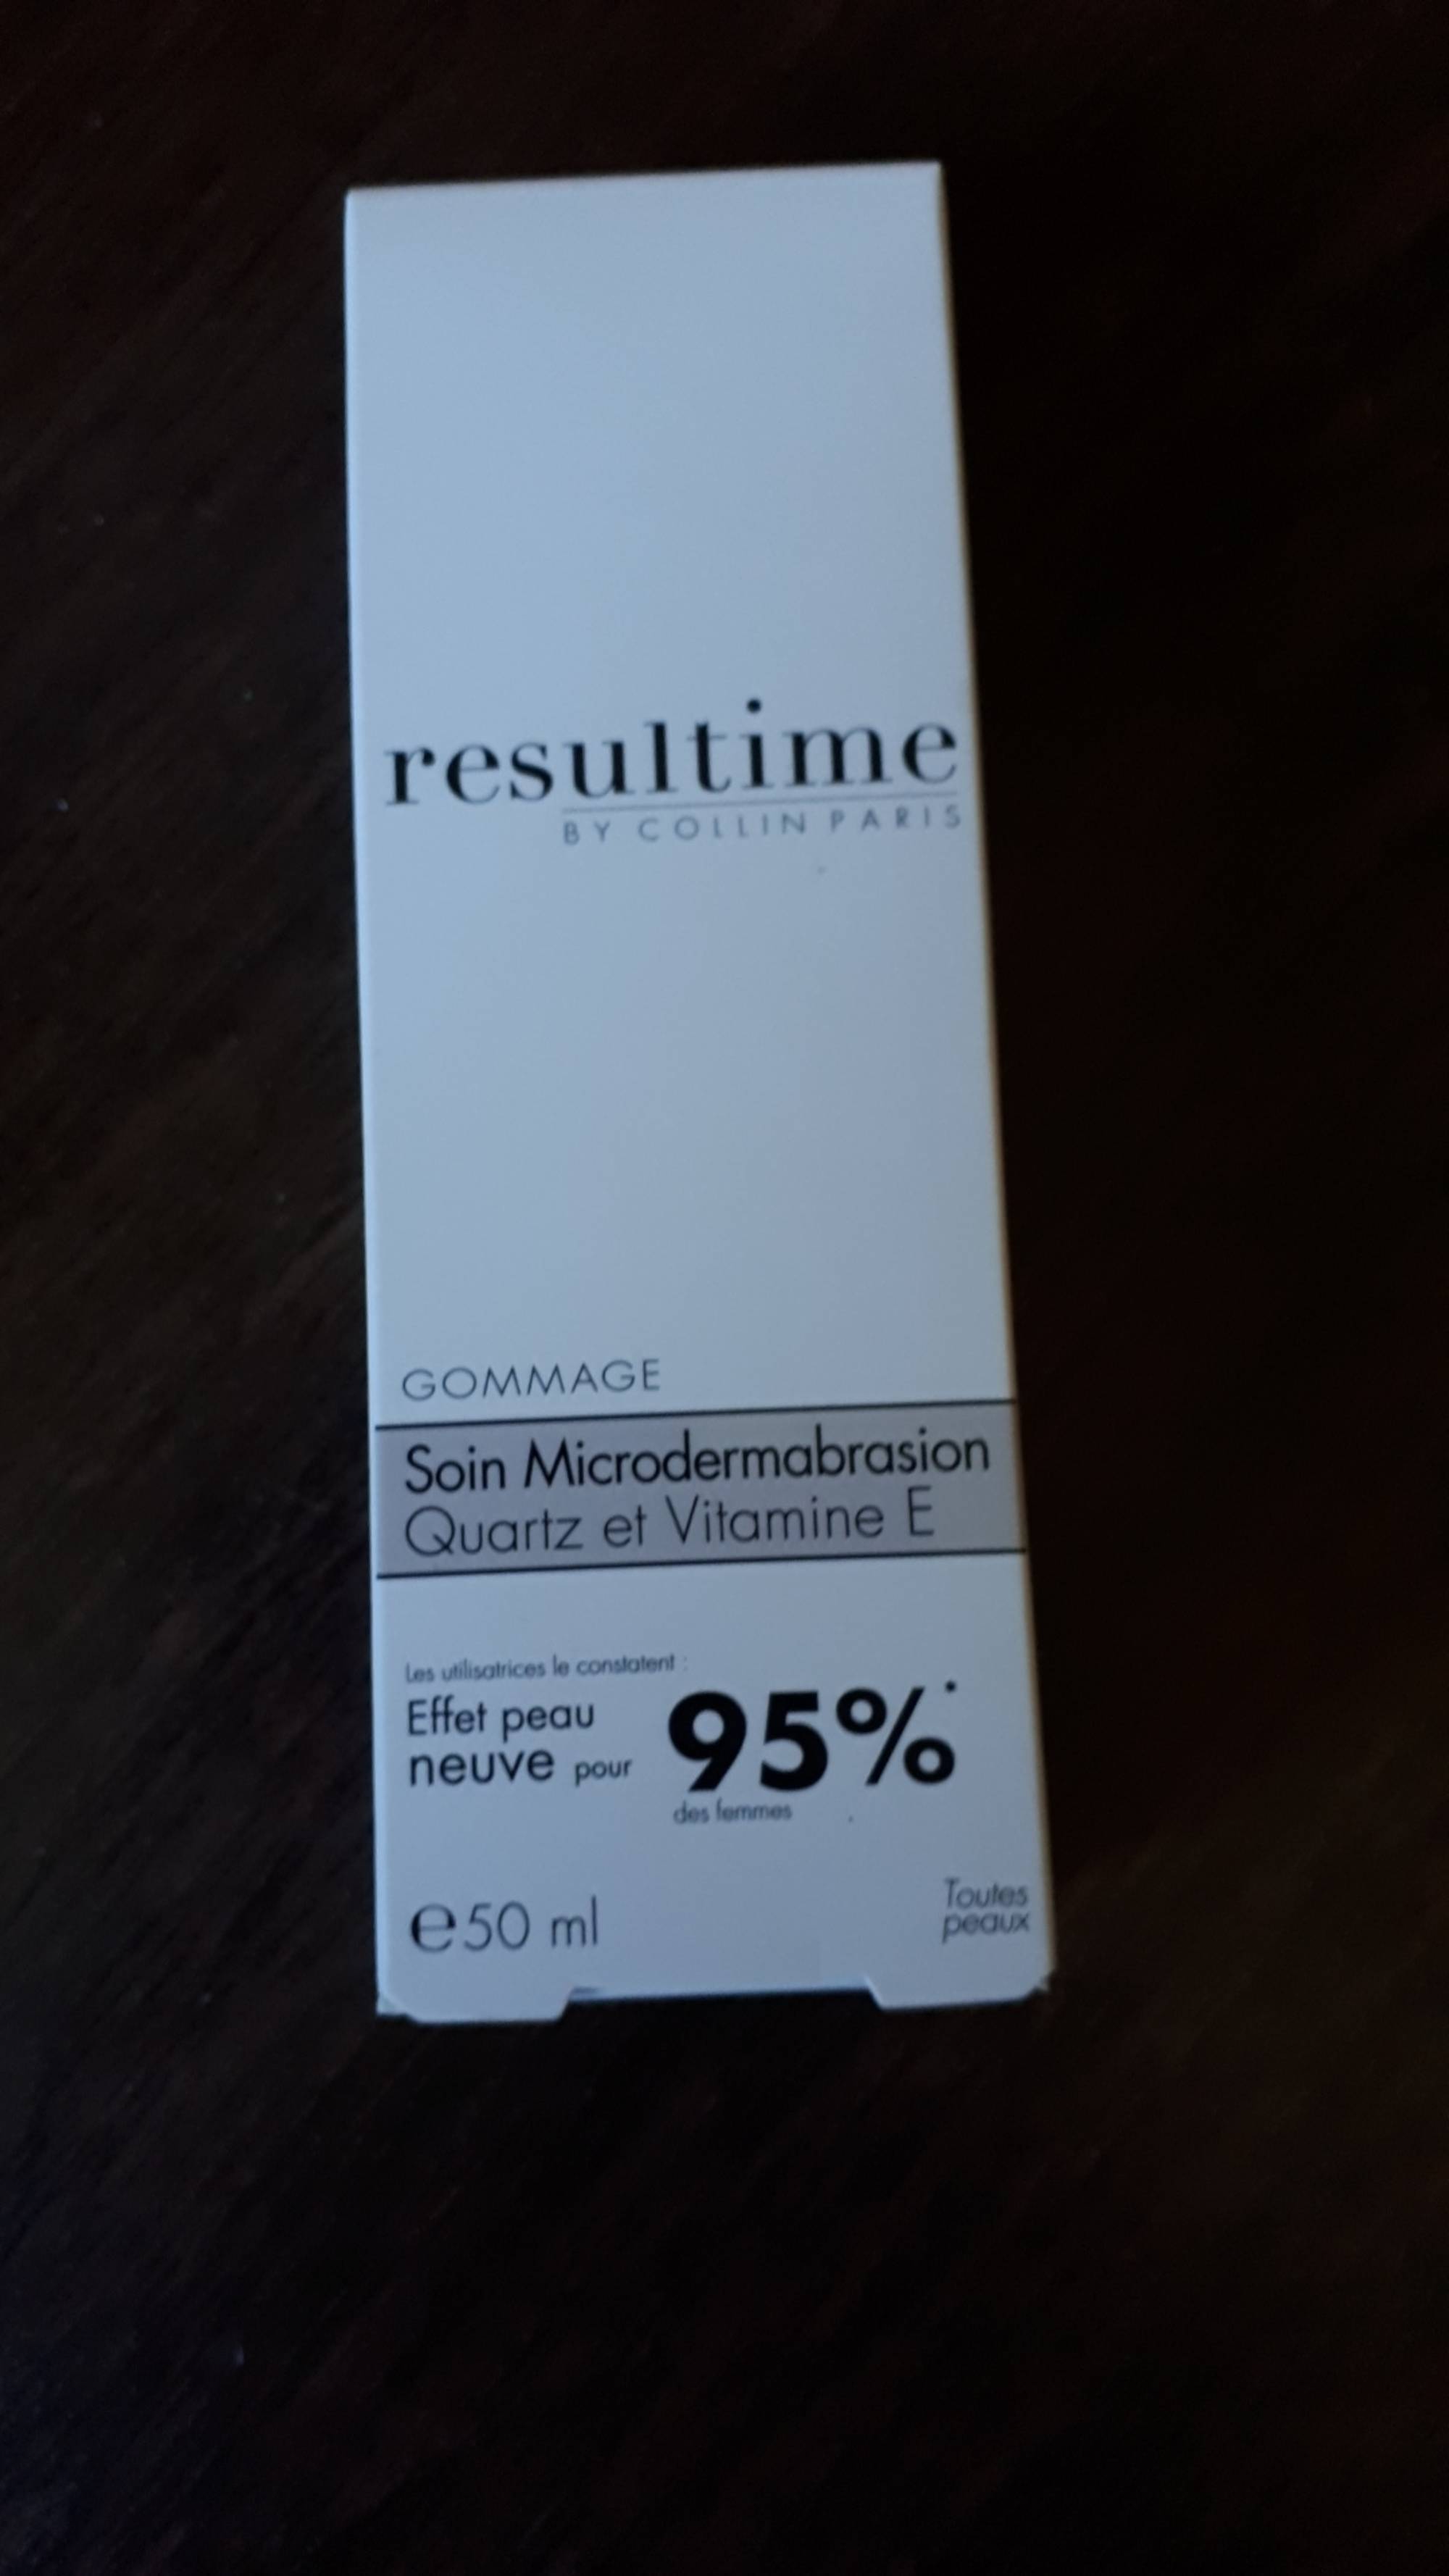 RESULTIME - Gommage soin microdermabrasion 